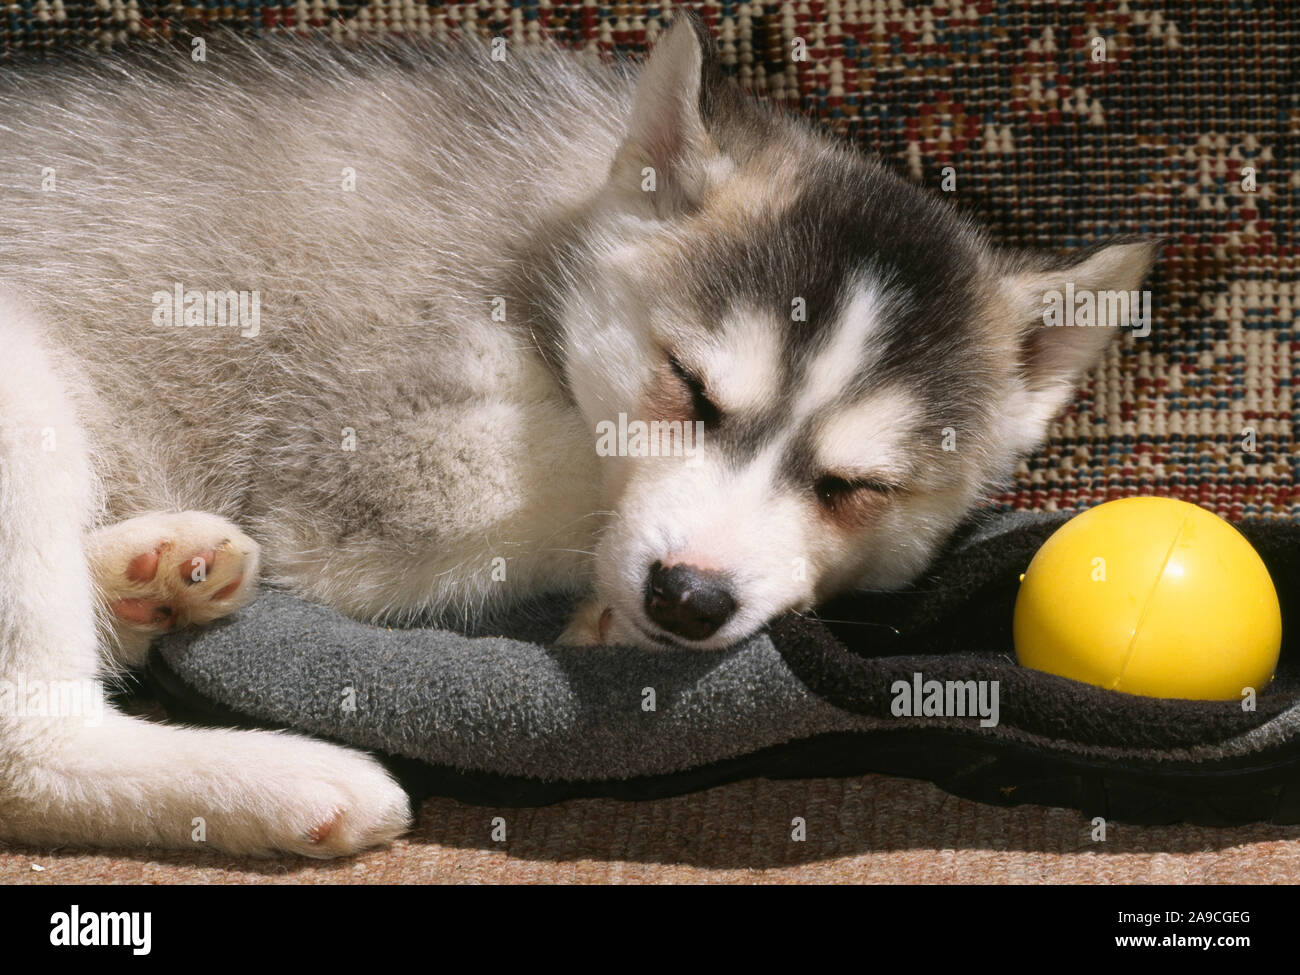 SIBERIAN HUSKY 8 week old puppy Canis lupus familiaris sleeping on slipper with play ball. Let sleeping dogs lie. Stock Photo